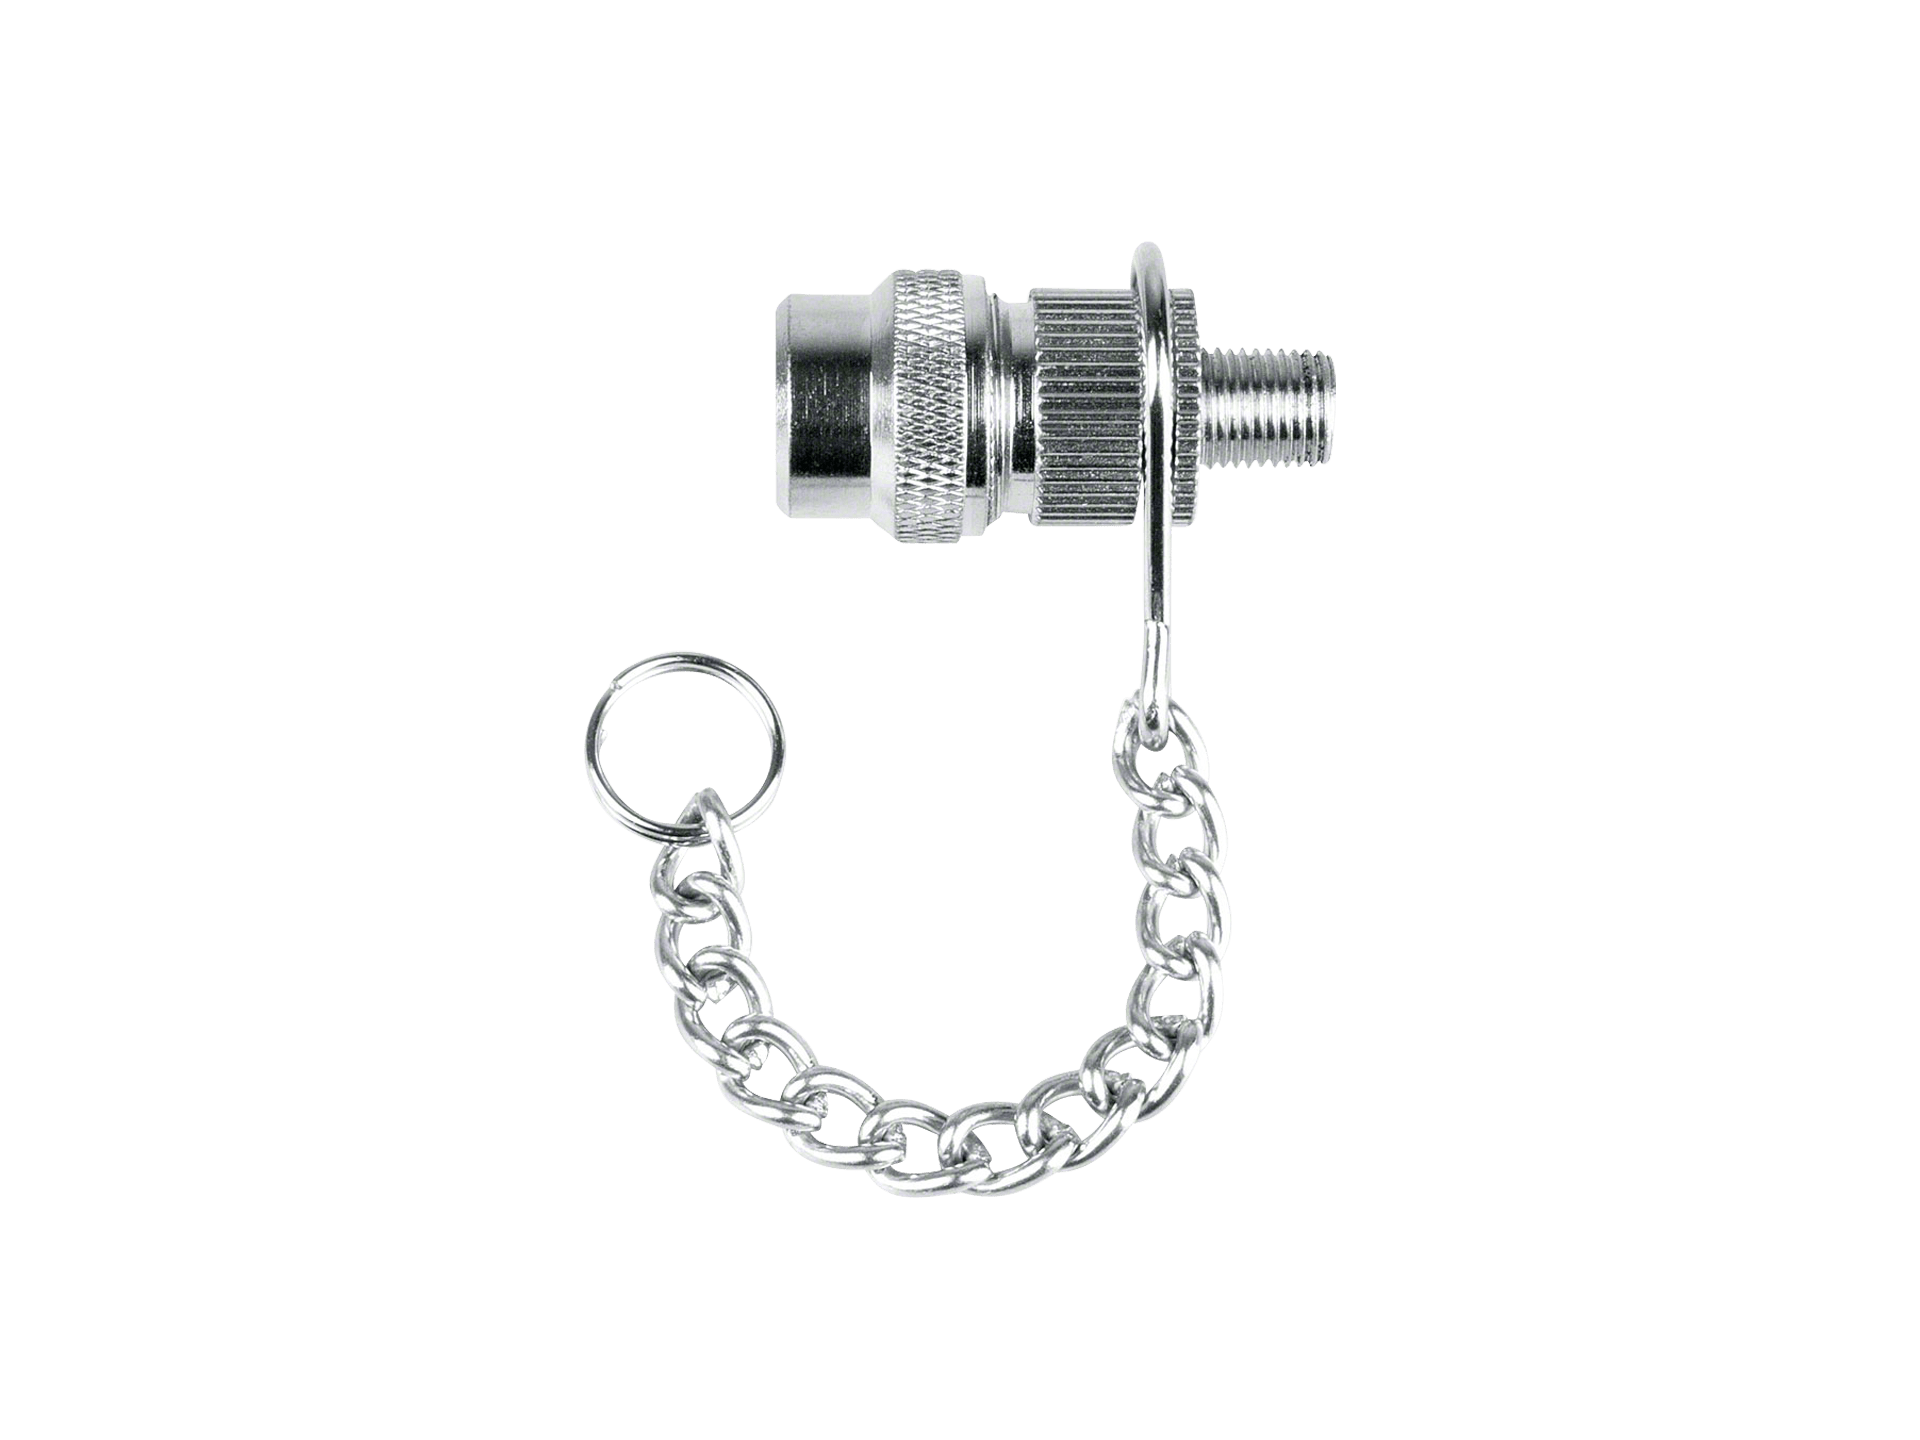 SKS Pump Valve Adapter with Chain